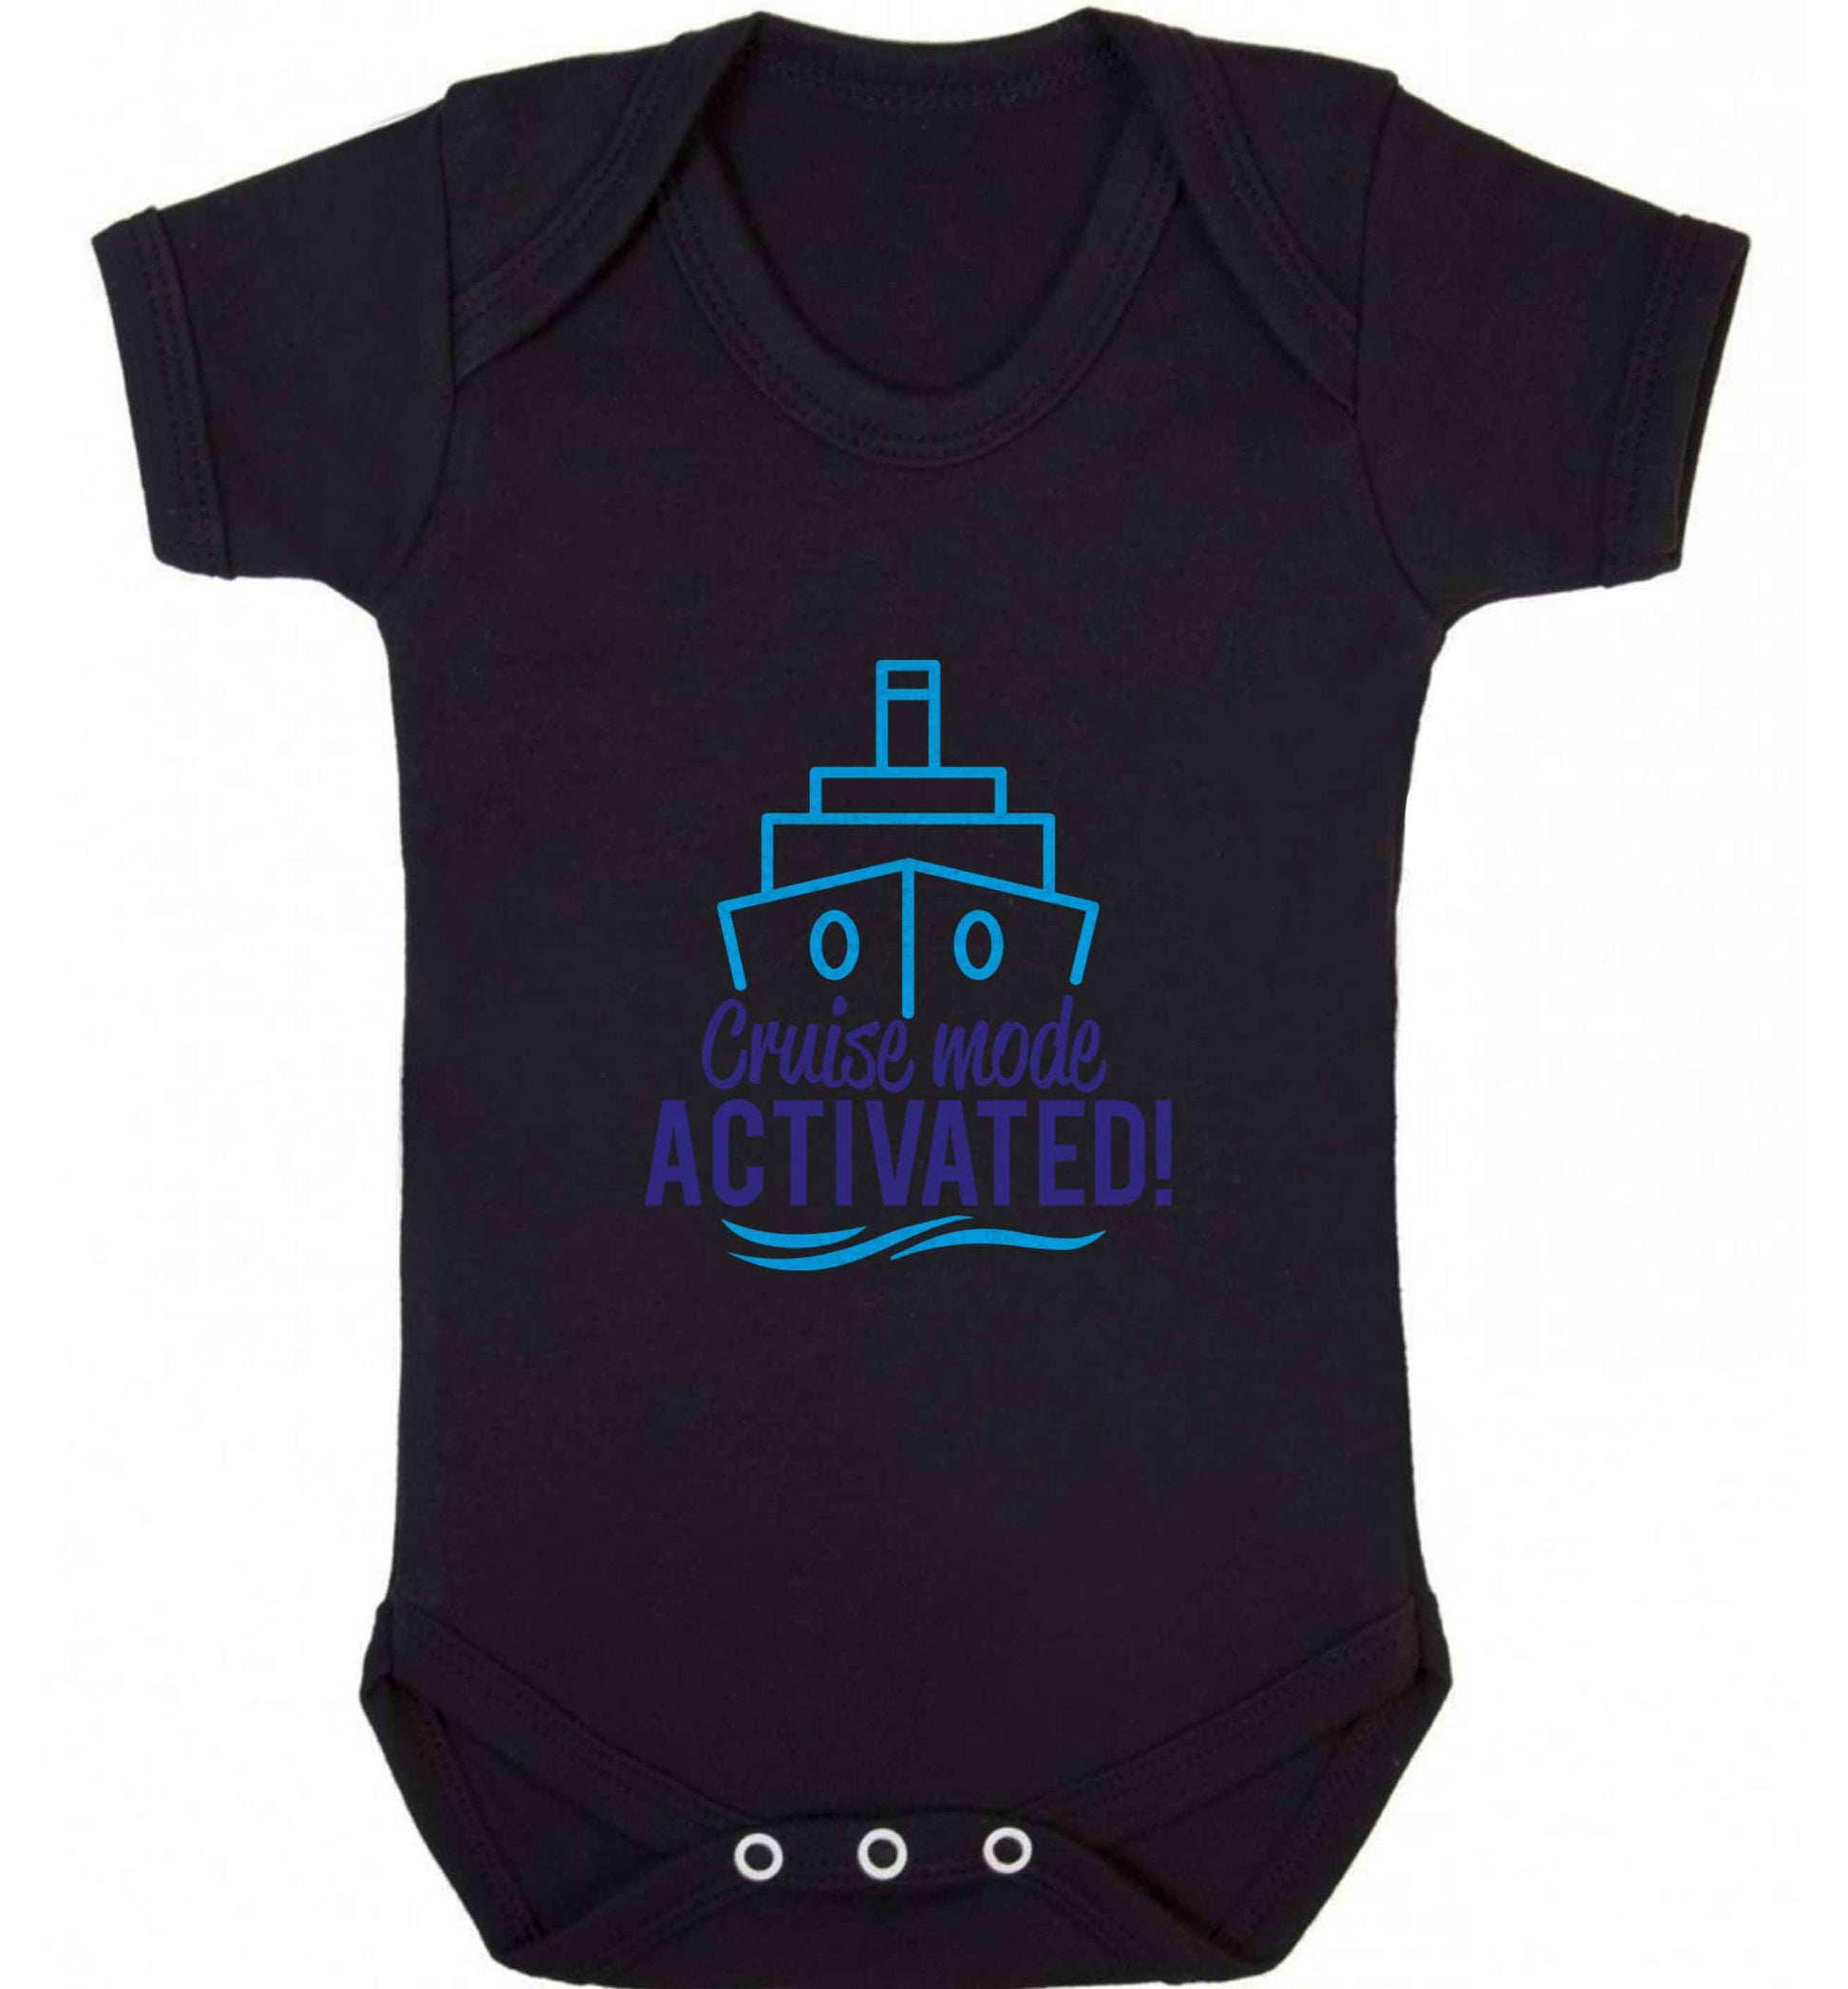 Cruise mode activated baby vest black 18-24 months